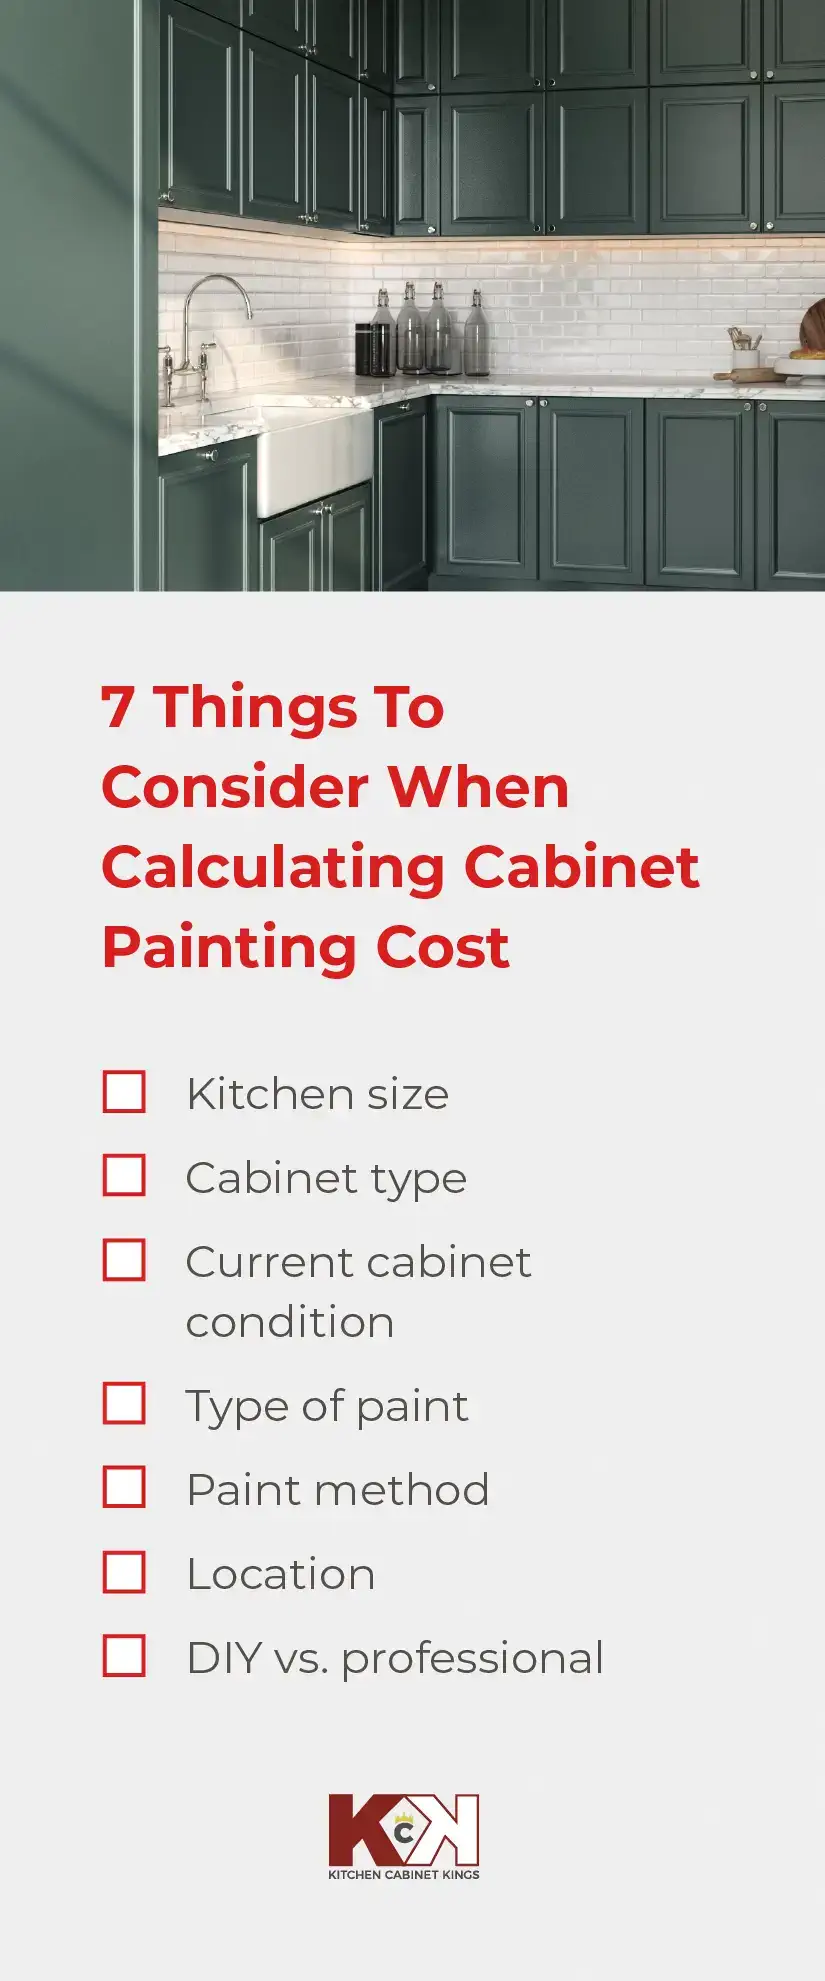 List of things to consider when calculating cabinet painting cost.